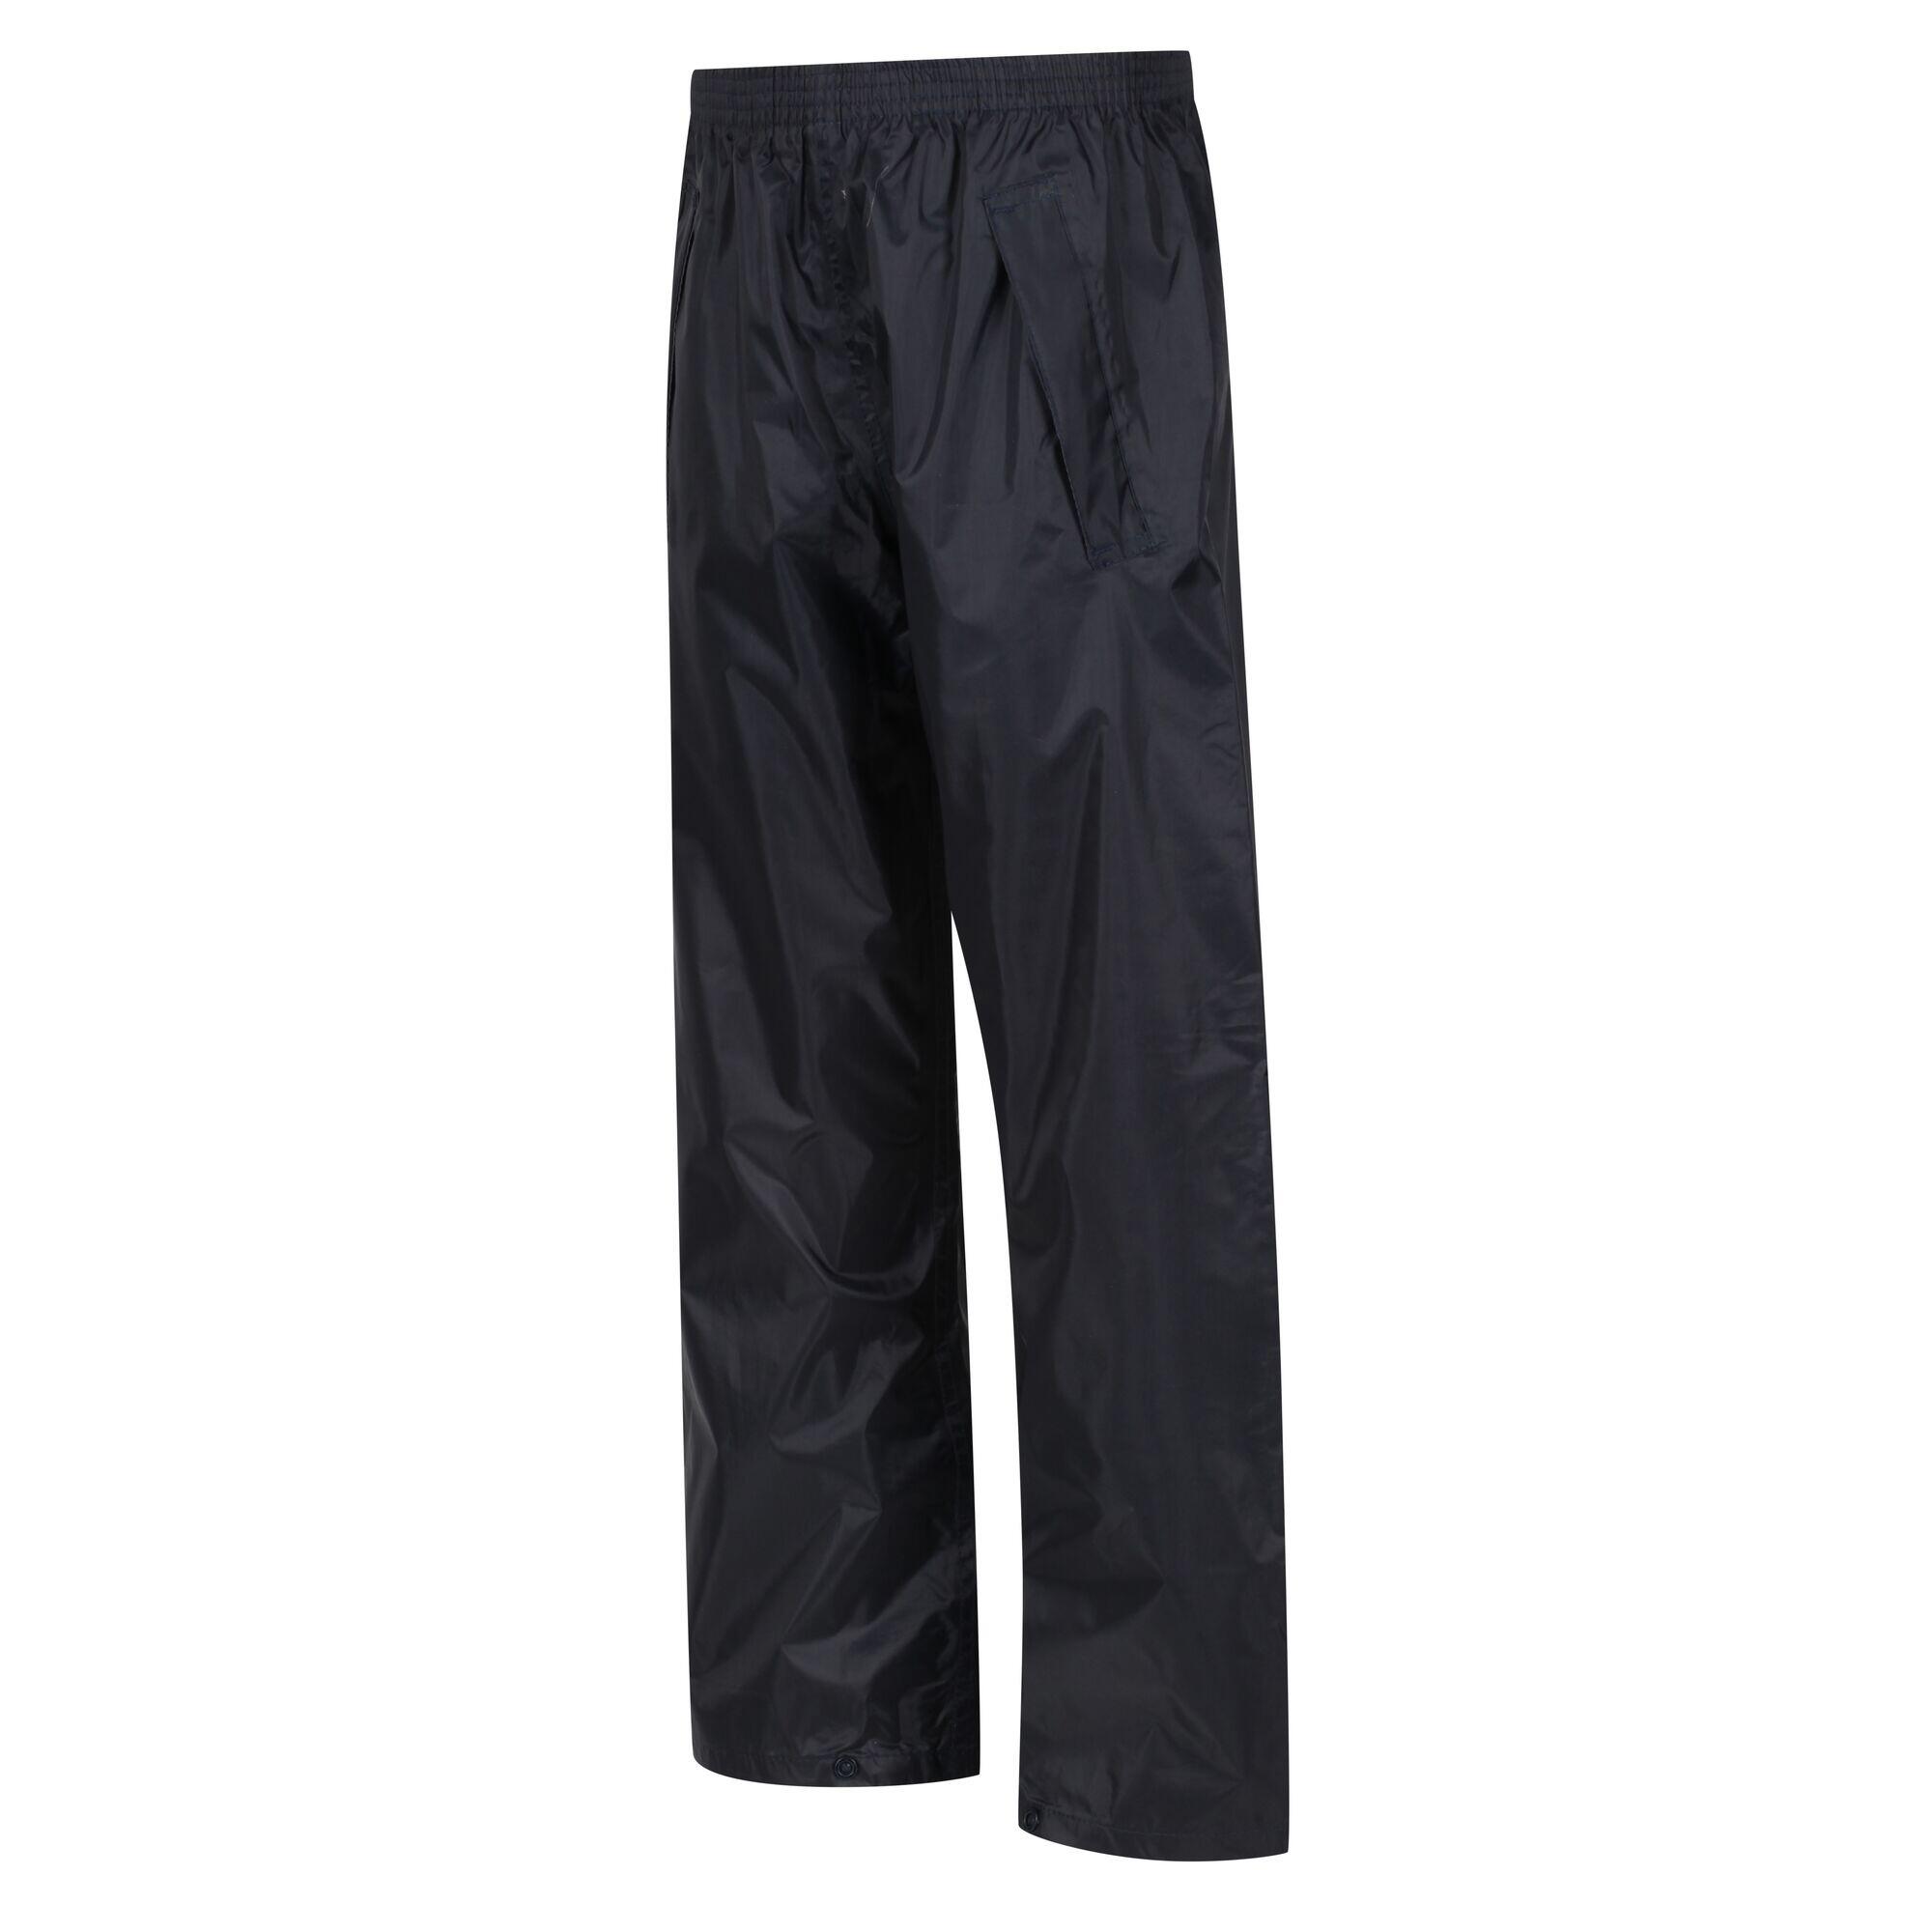 Cheap Childrens Waterproof Trousers Sale  GO Outdoors